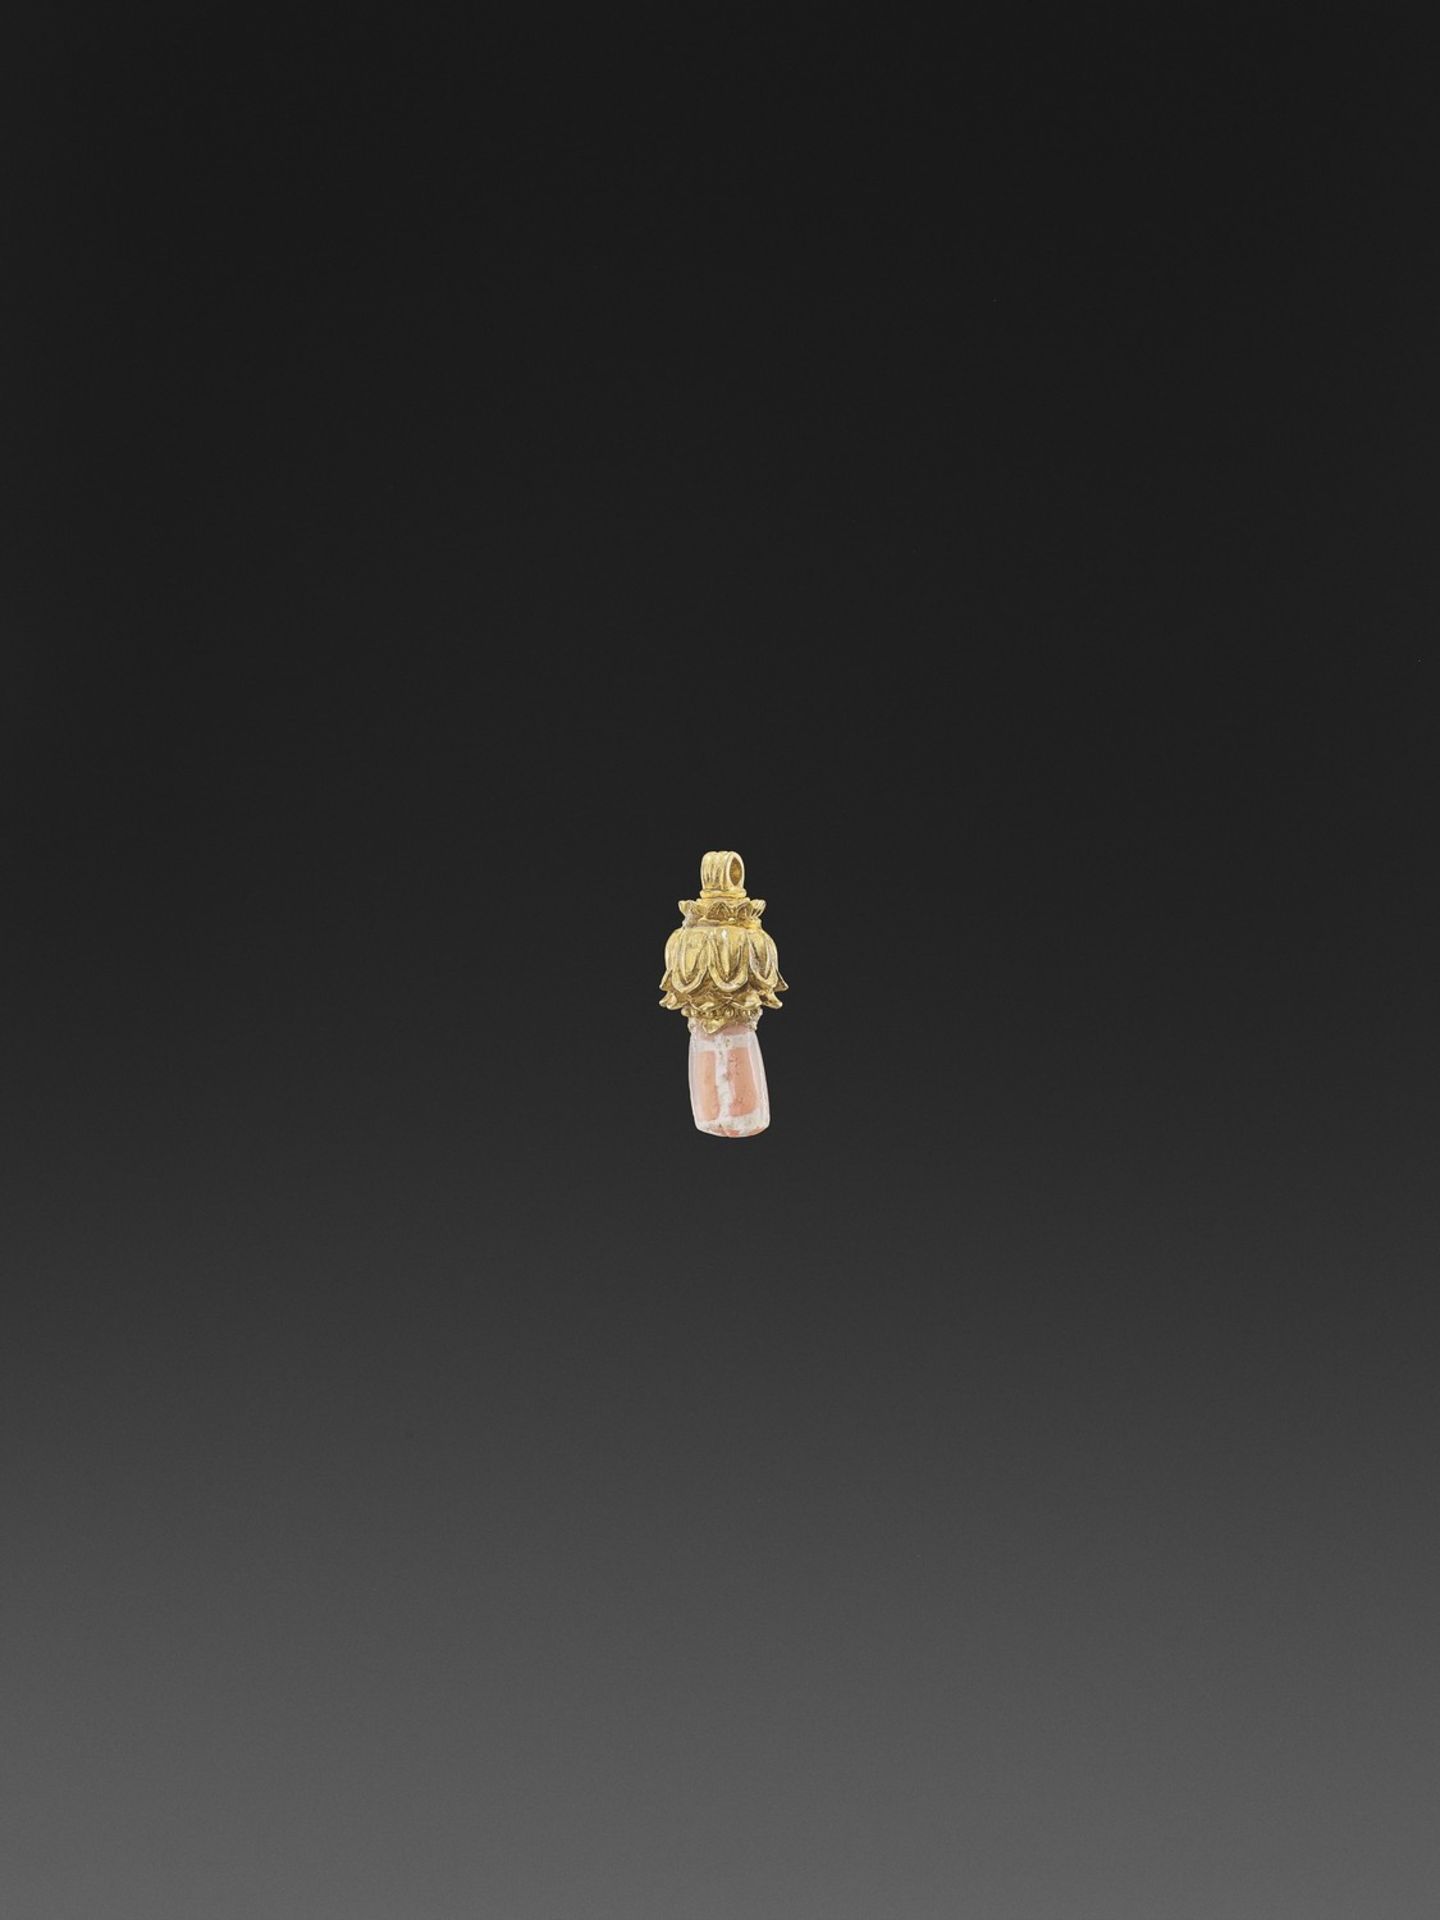 A PYU GOLD ‘LOTUS’ PENDANT WITH AGATE BEAD - Image 3 of 4